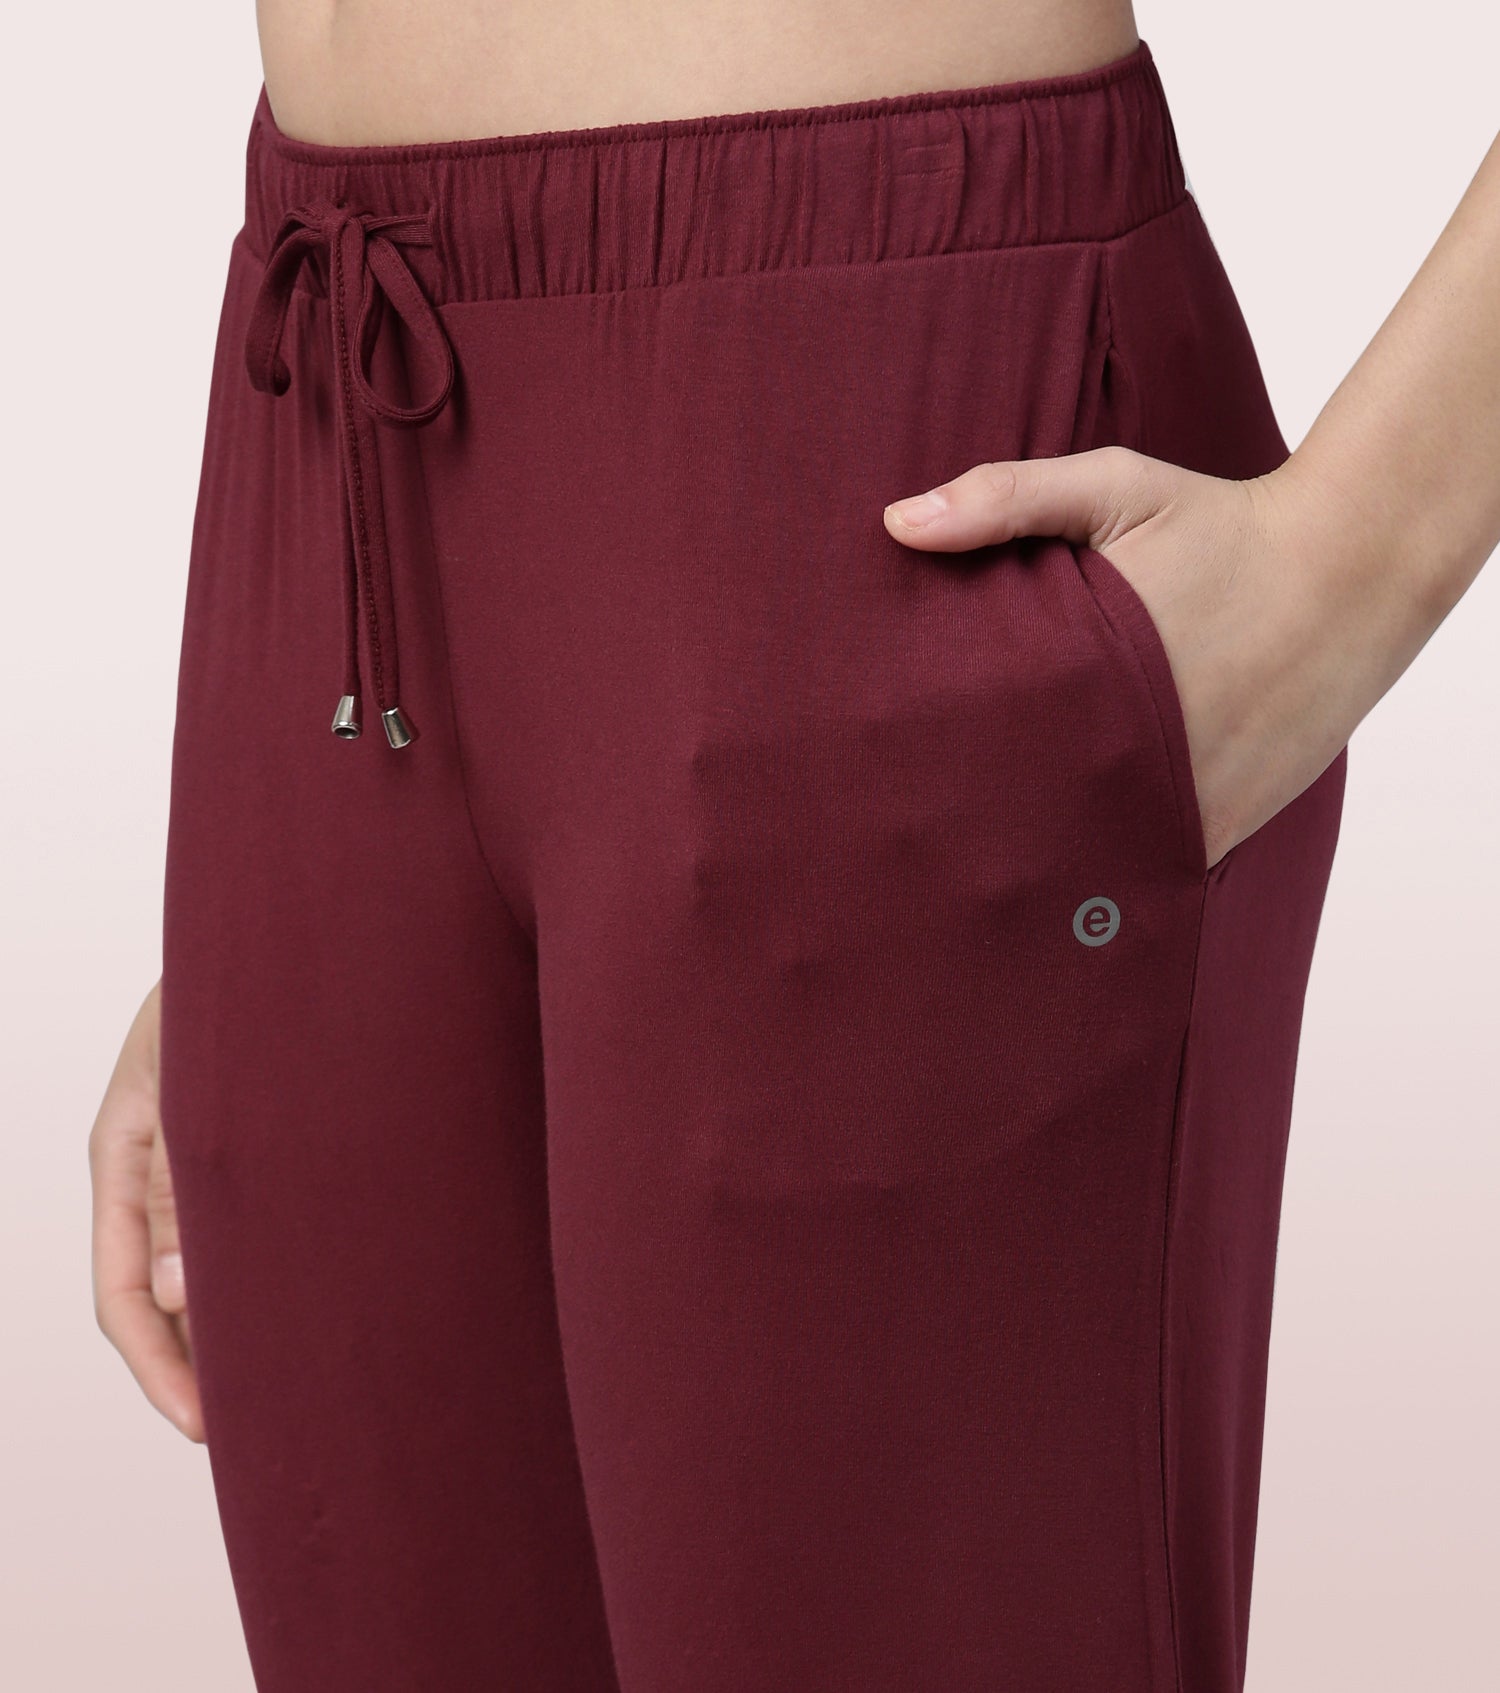 Lazy Pant | Pull-On Flannel Pants With Satin Adjustable Waist Drawstring & Pockets